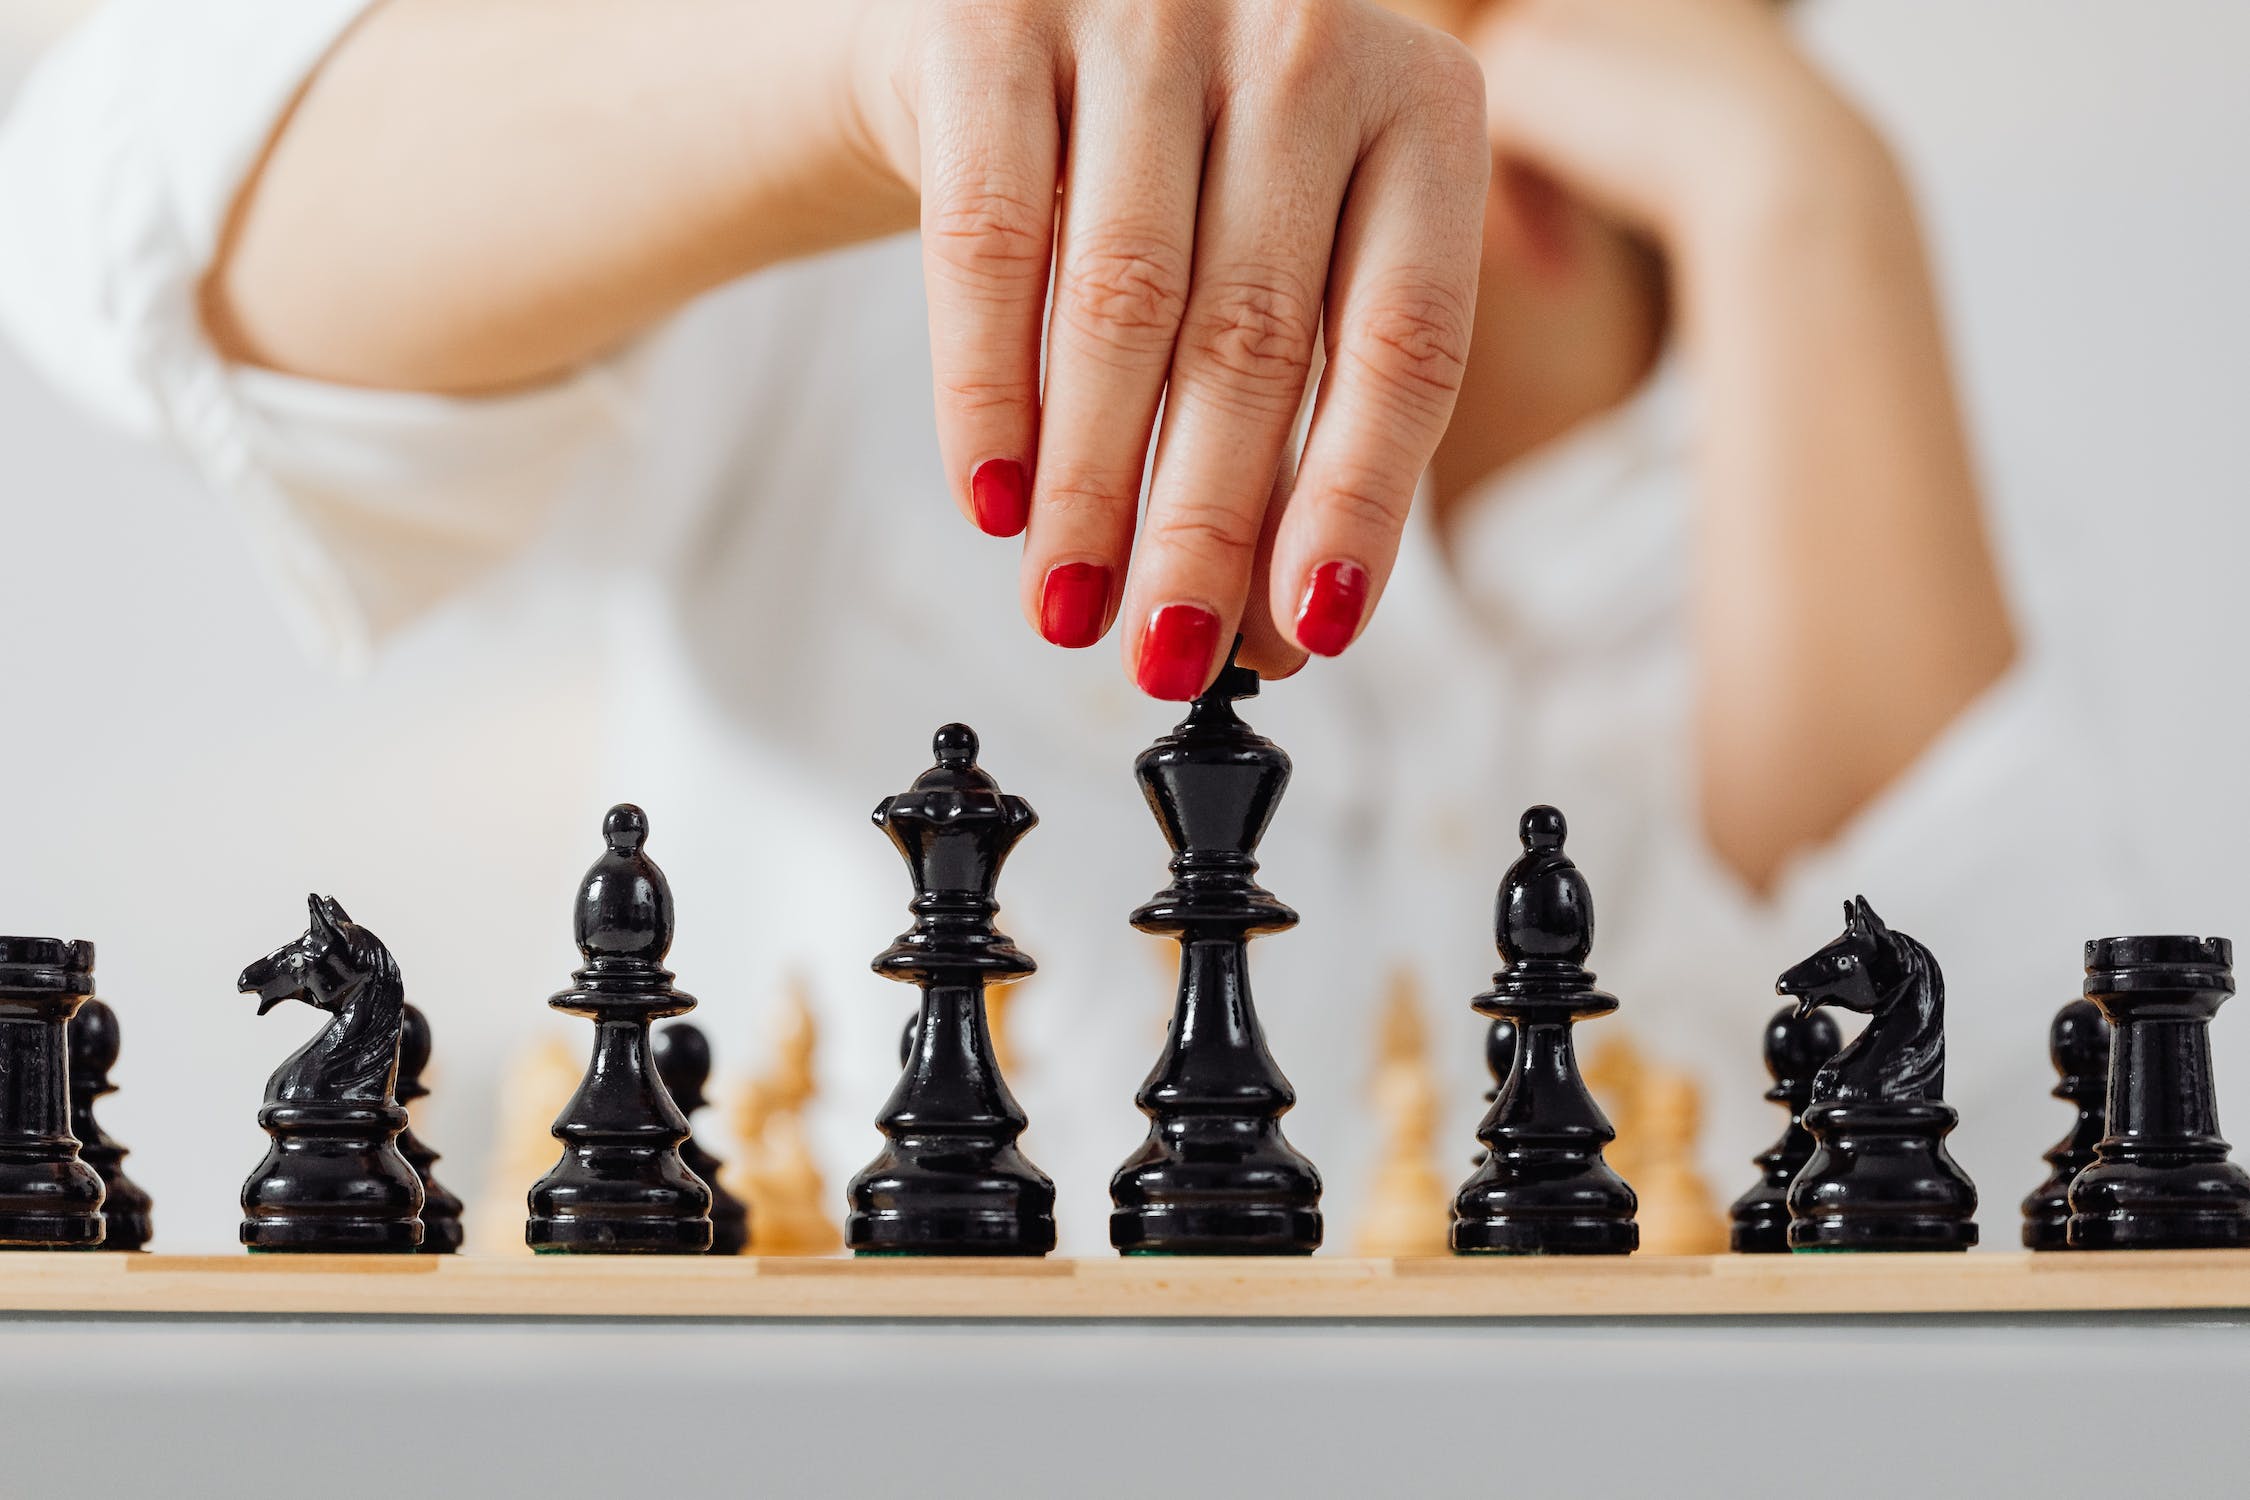 Once again, trans athletes are scapegoated for sexism, this time in chess